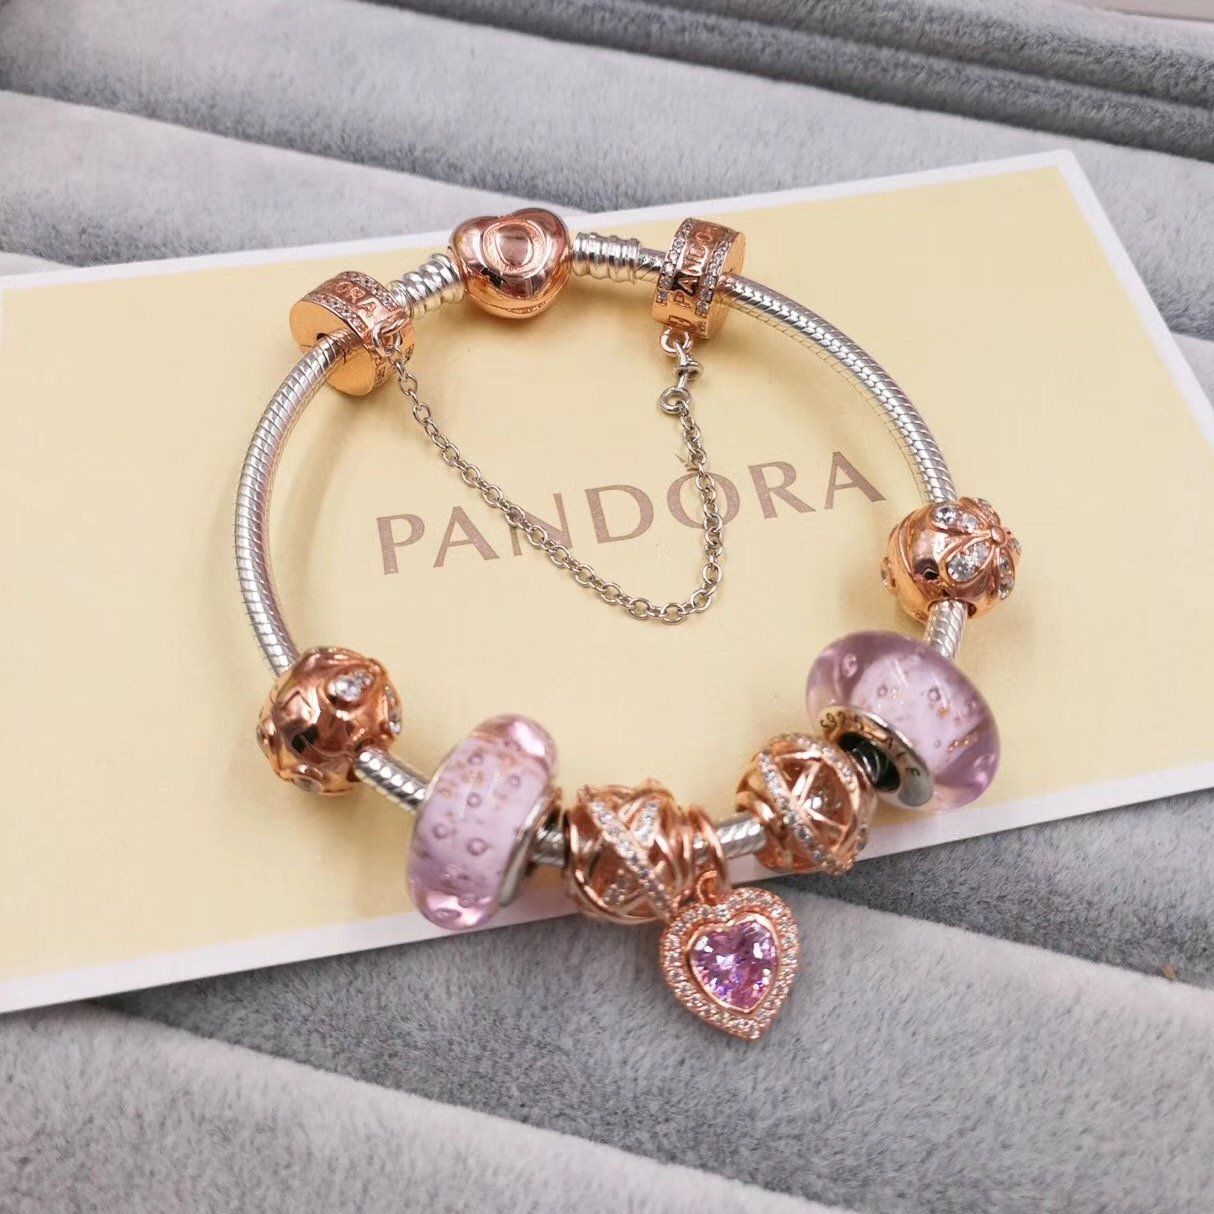 New in our store:pandora charm bra… check it out here!http://www.charmsilvers….